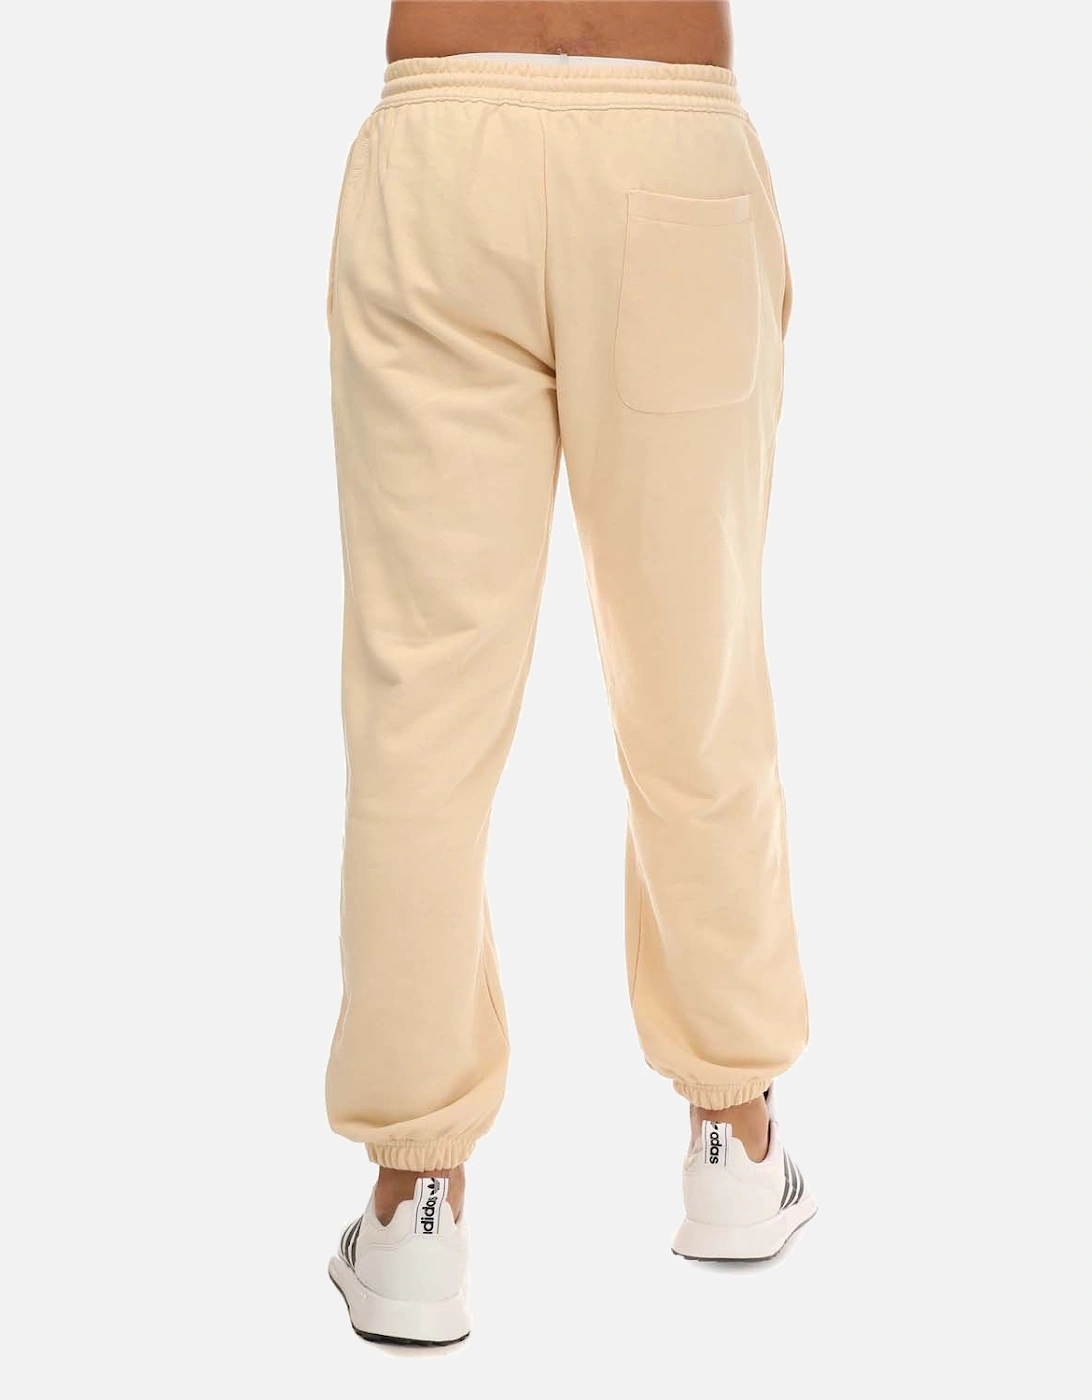 Mens All SZN French Terry pants